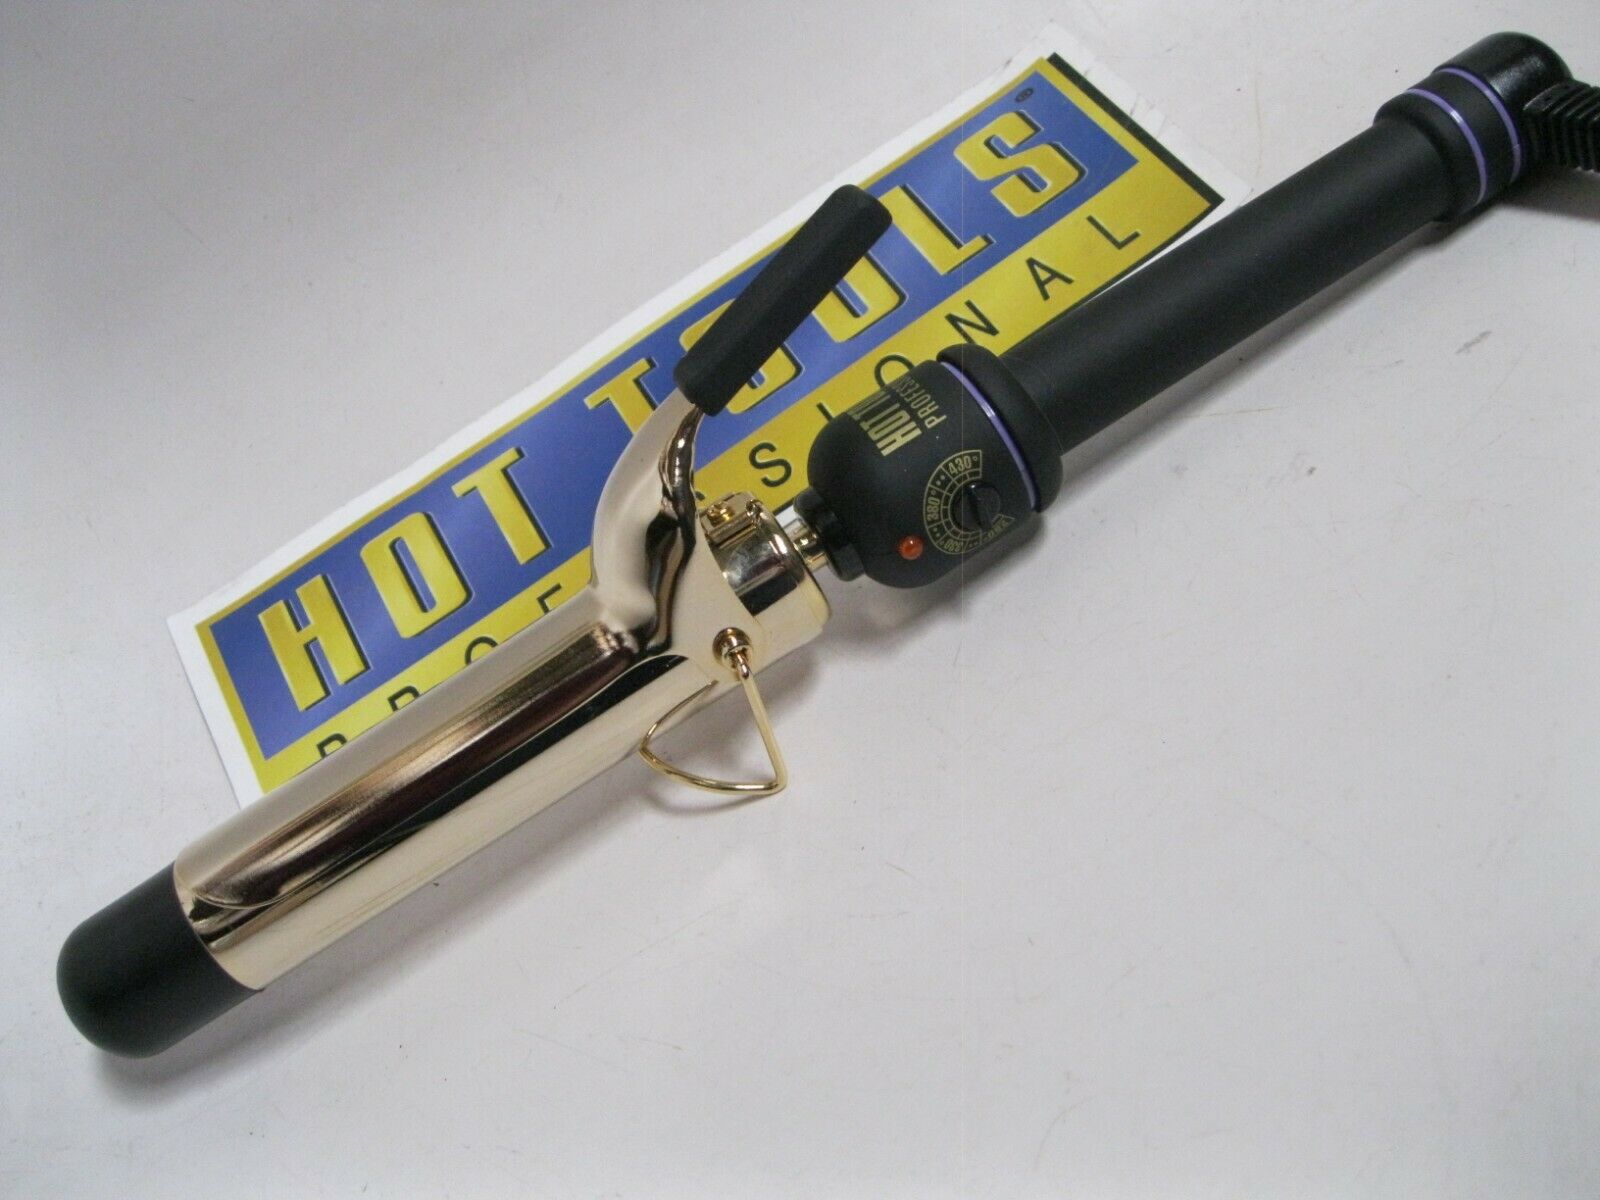 Hot Tools Professional 1 1/4  Inch Variable Heat 24k Gold Hair Curling Iron 1110